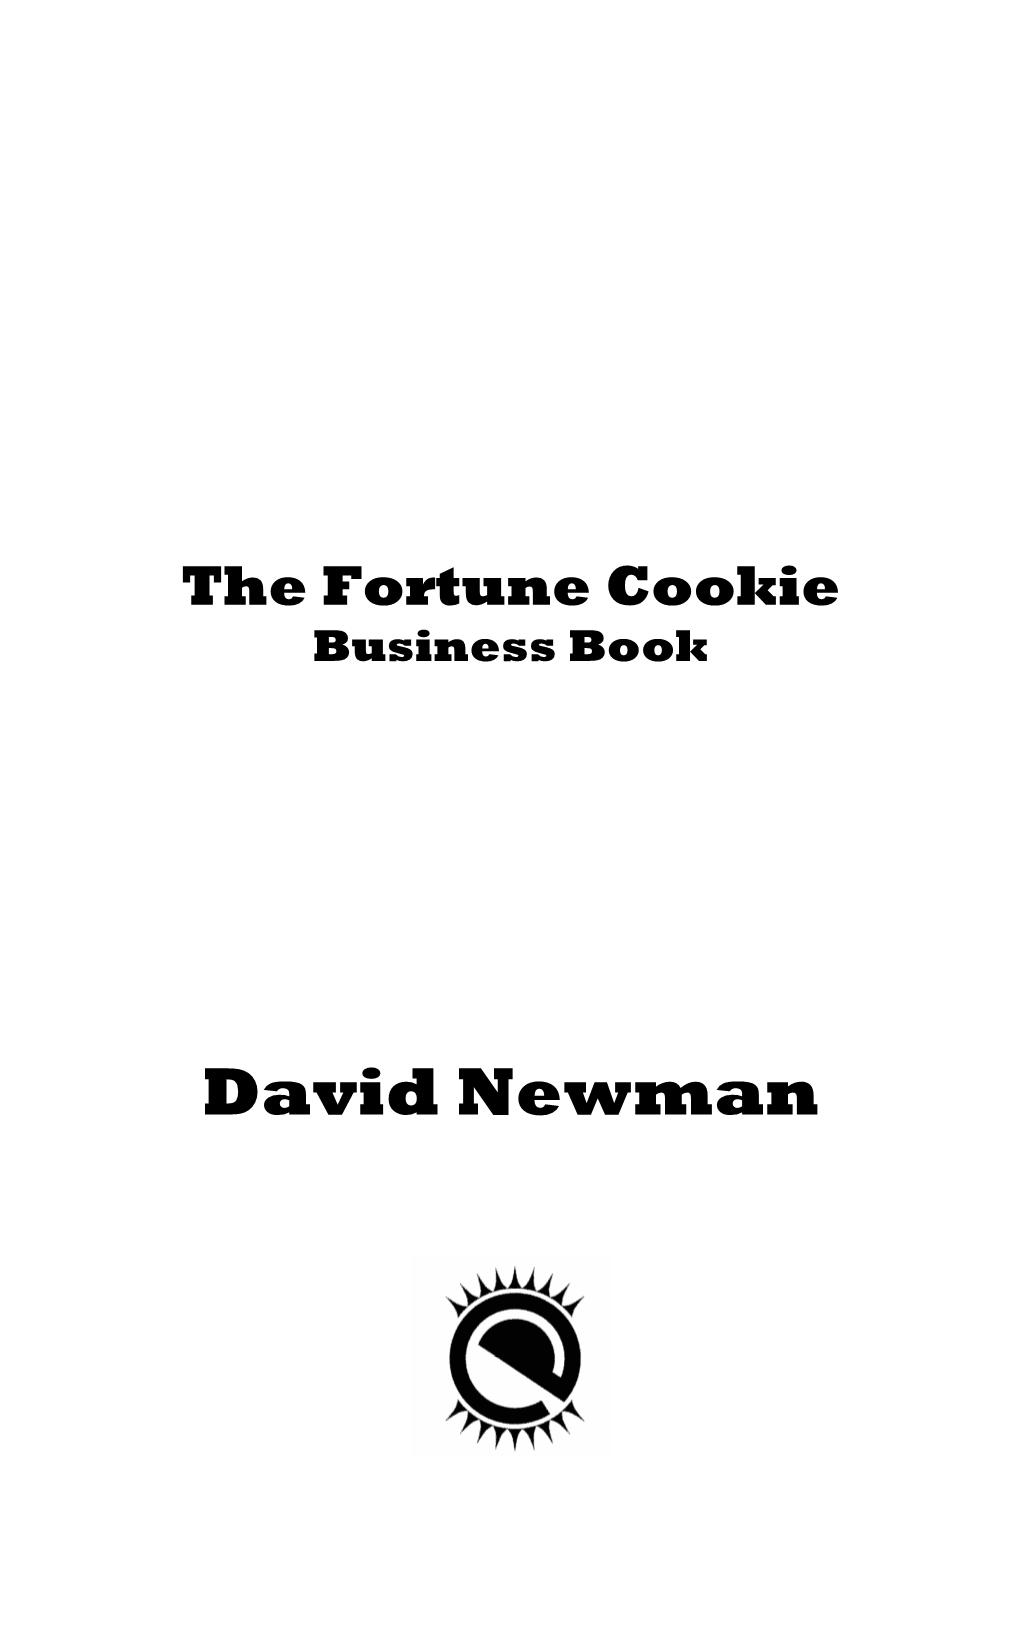 Fortune Cookie Business Book